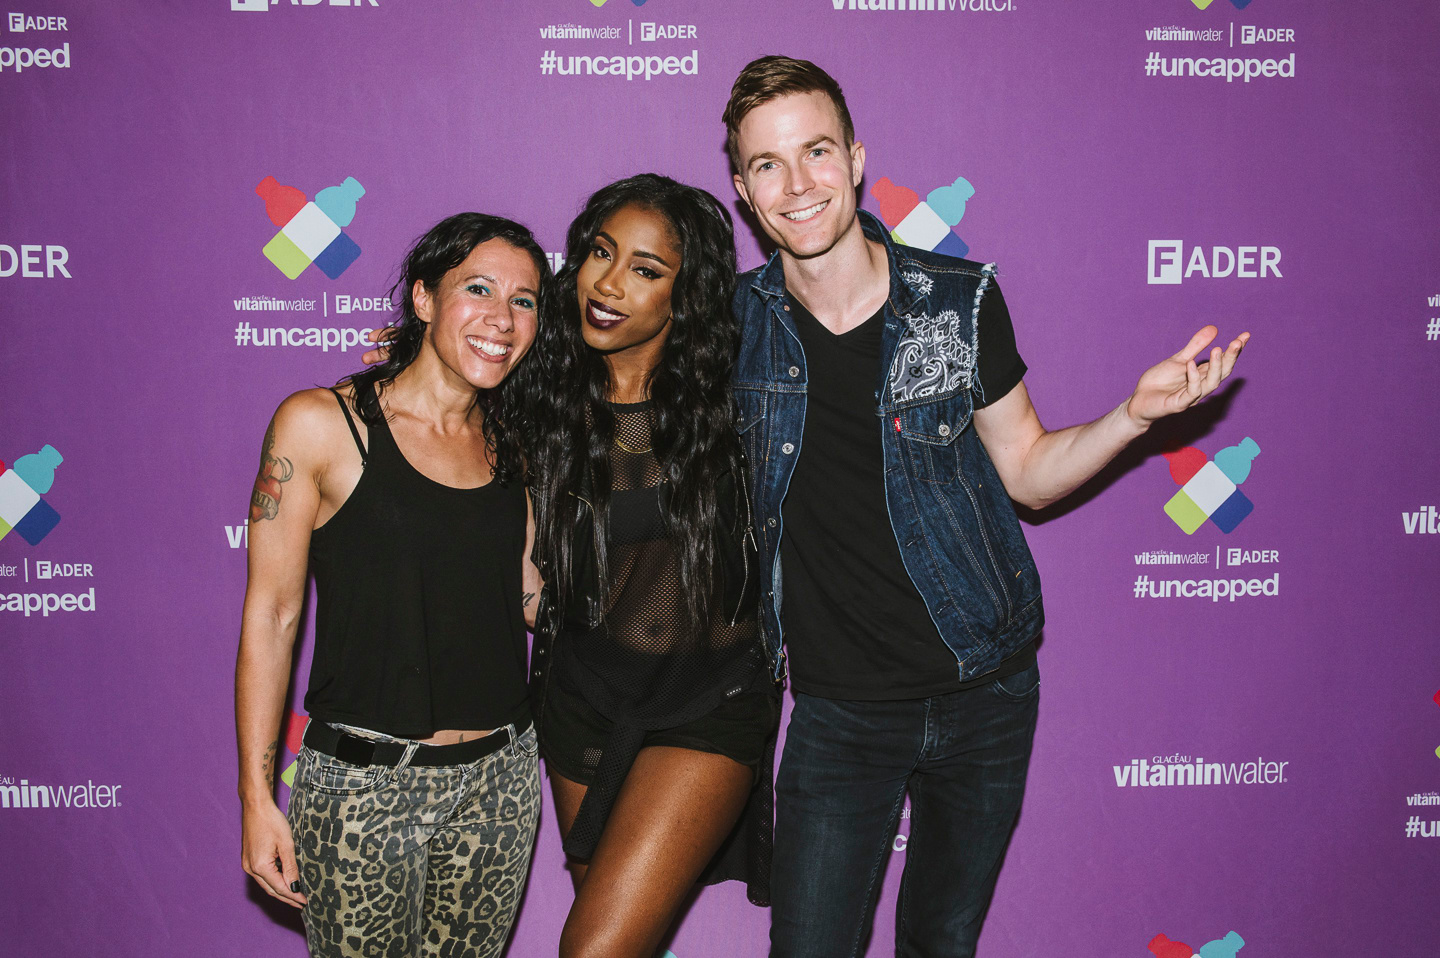 #uncapped Gets Off To An Electric Start With Matt And Kim And Sevyn Streeter